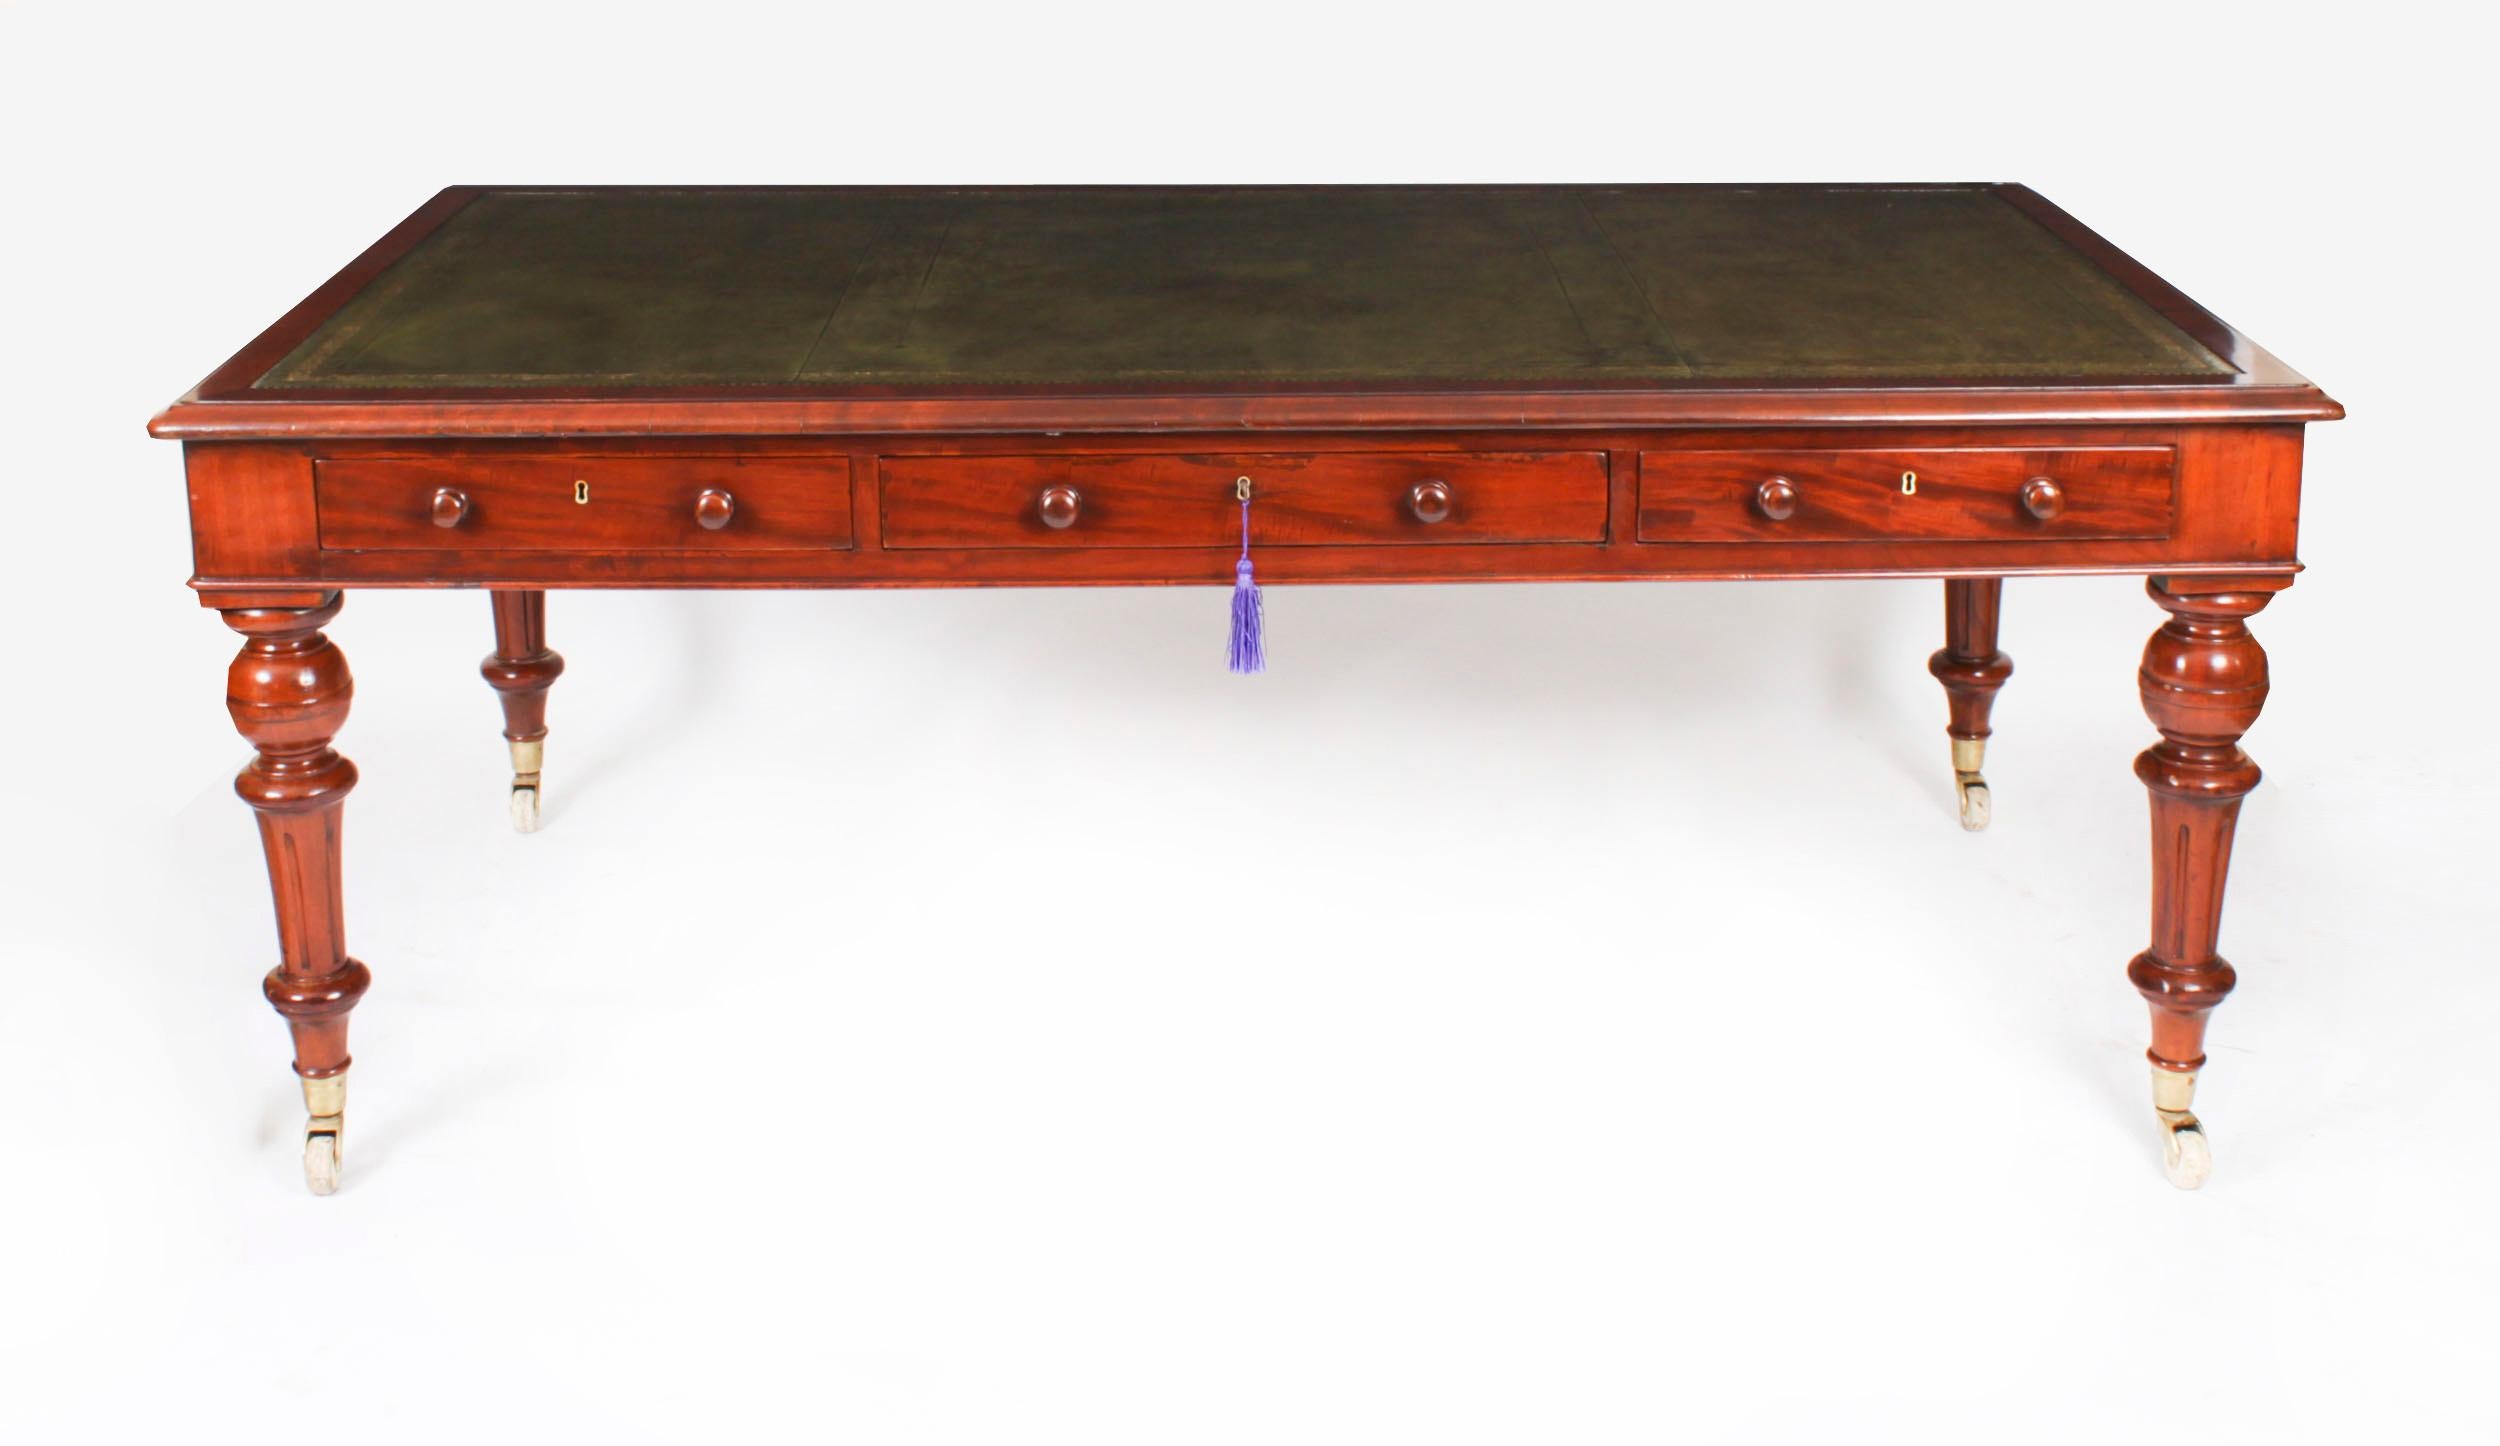 This gorgeous Victorian antique partners library table is crafted from beautiful flame mahogany and dates from Circa 1860.

It features a striking inset green leather writing surface that has beautiful hand tooled and gilded impressed decoration. It